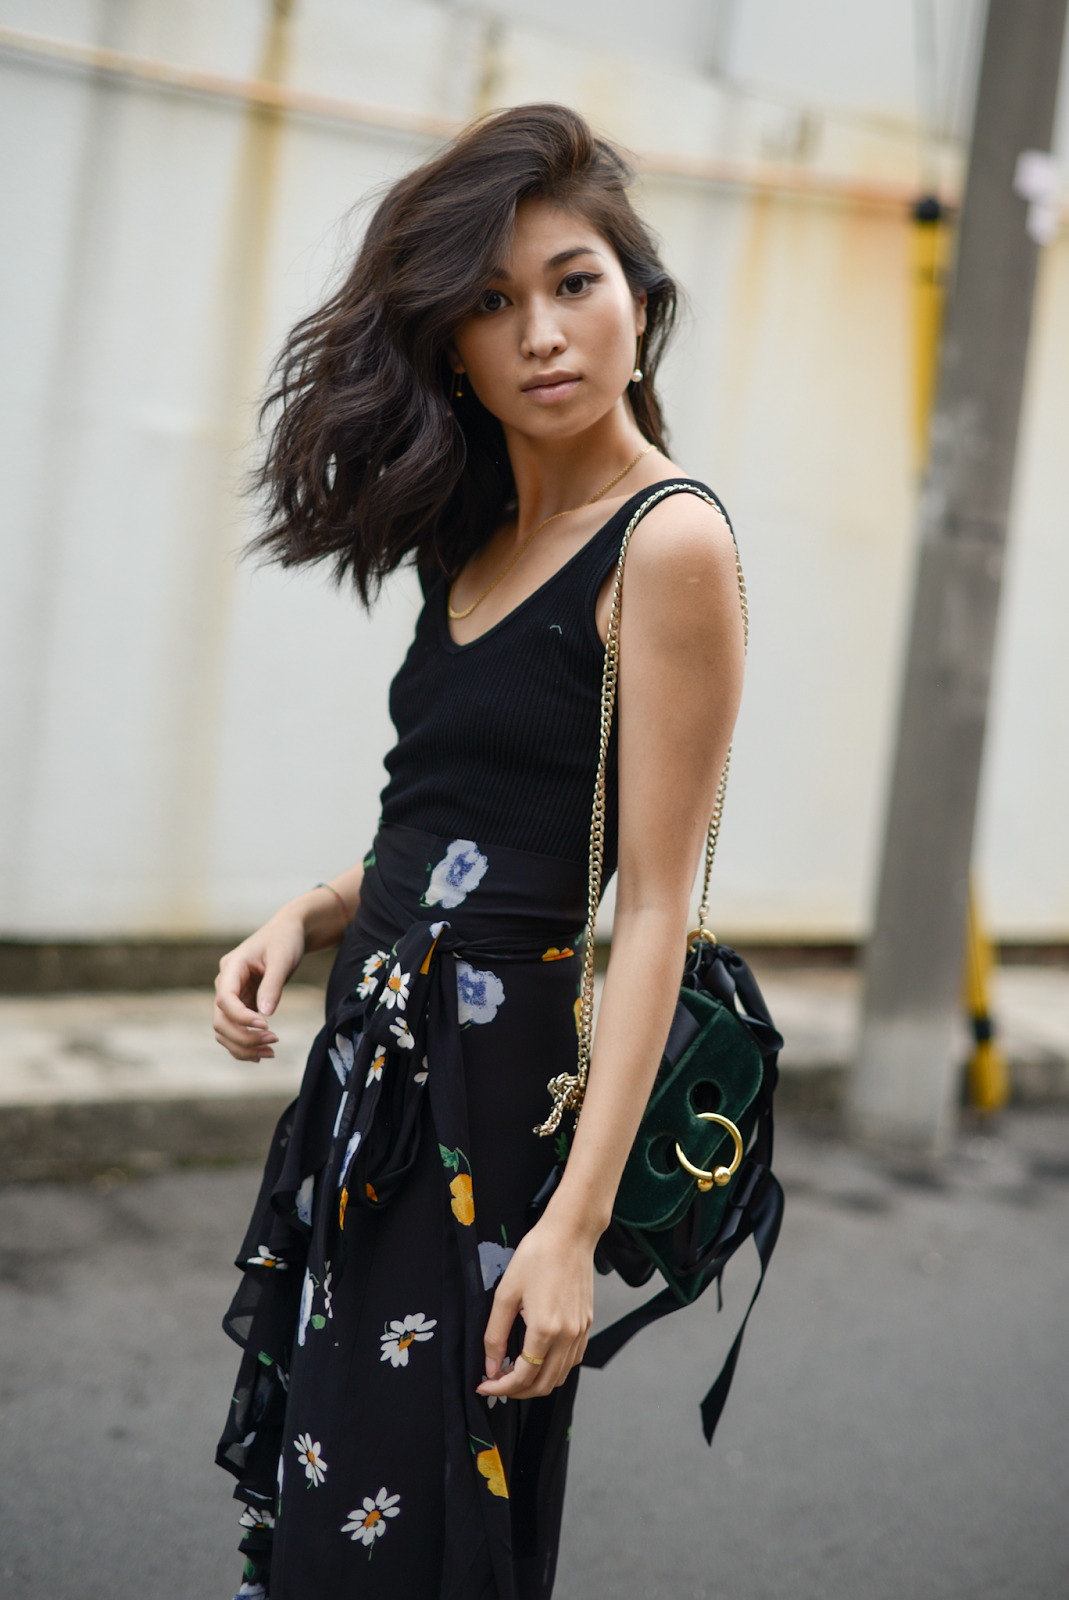 Ganni floral skirt, black floral outfit, summer style, dark florals, transitional style, personal style blog, August street style outfits / 082018 / 25 To Life - FOREVERVANNY